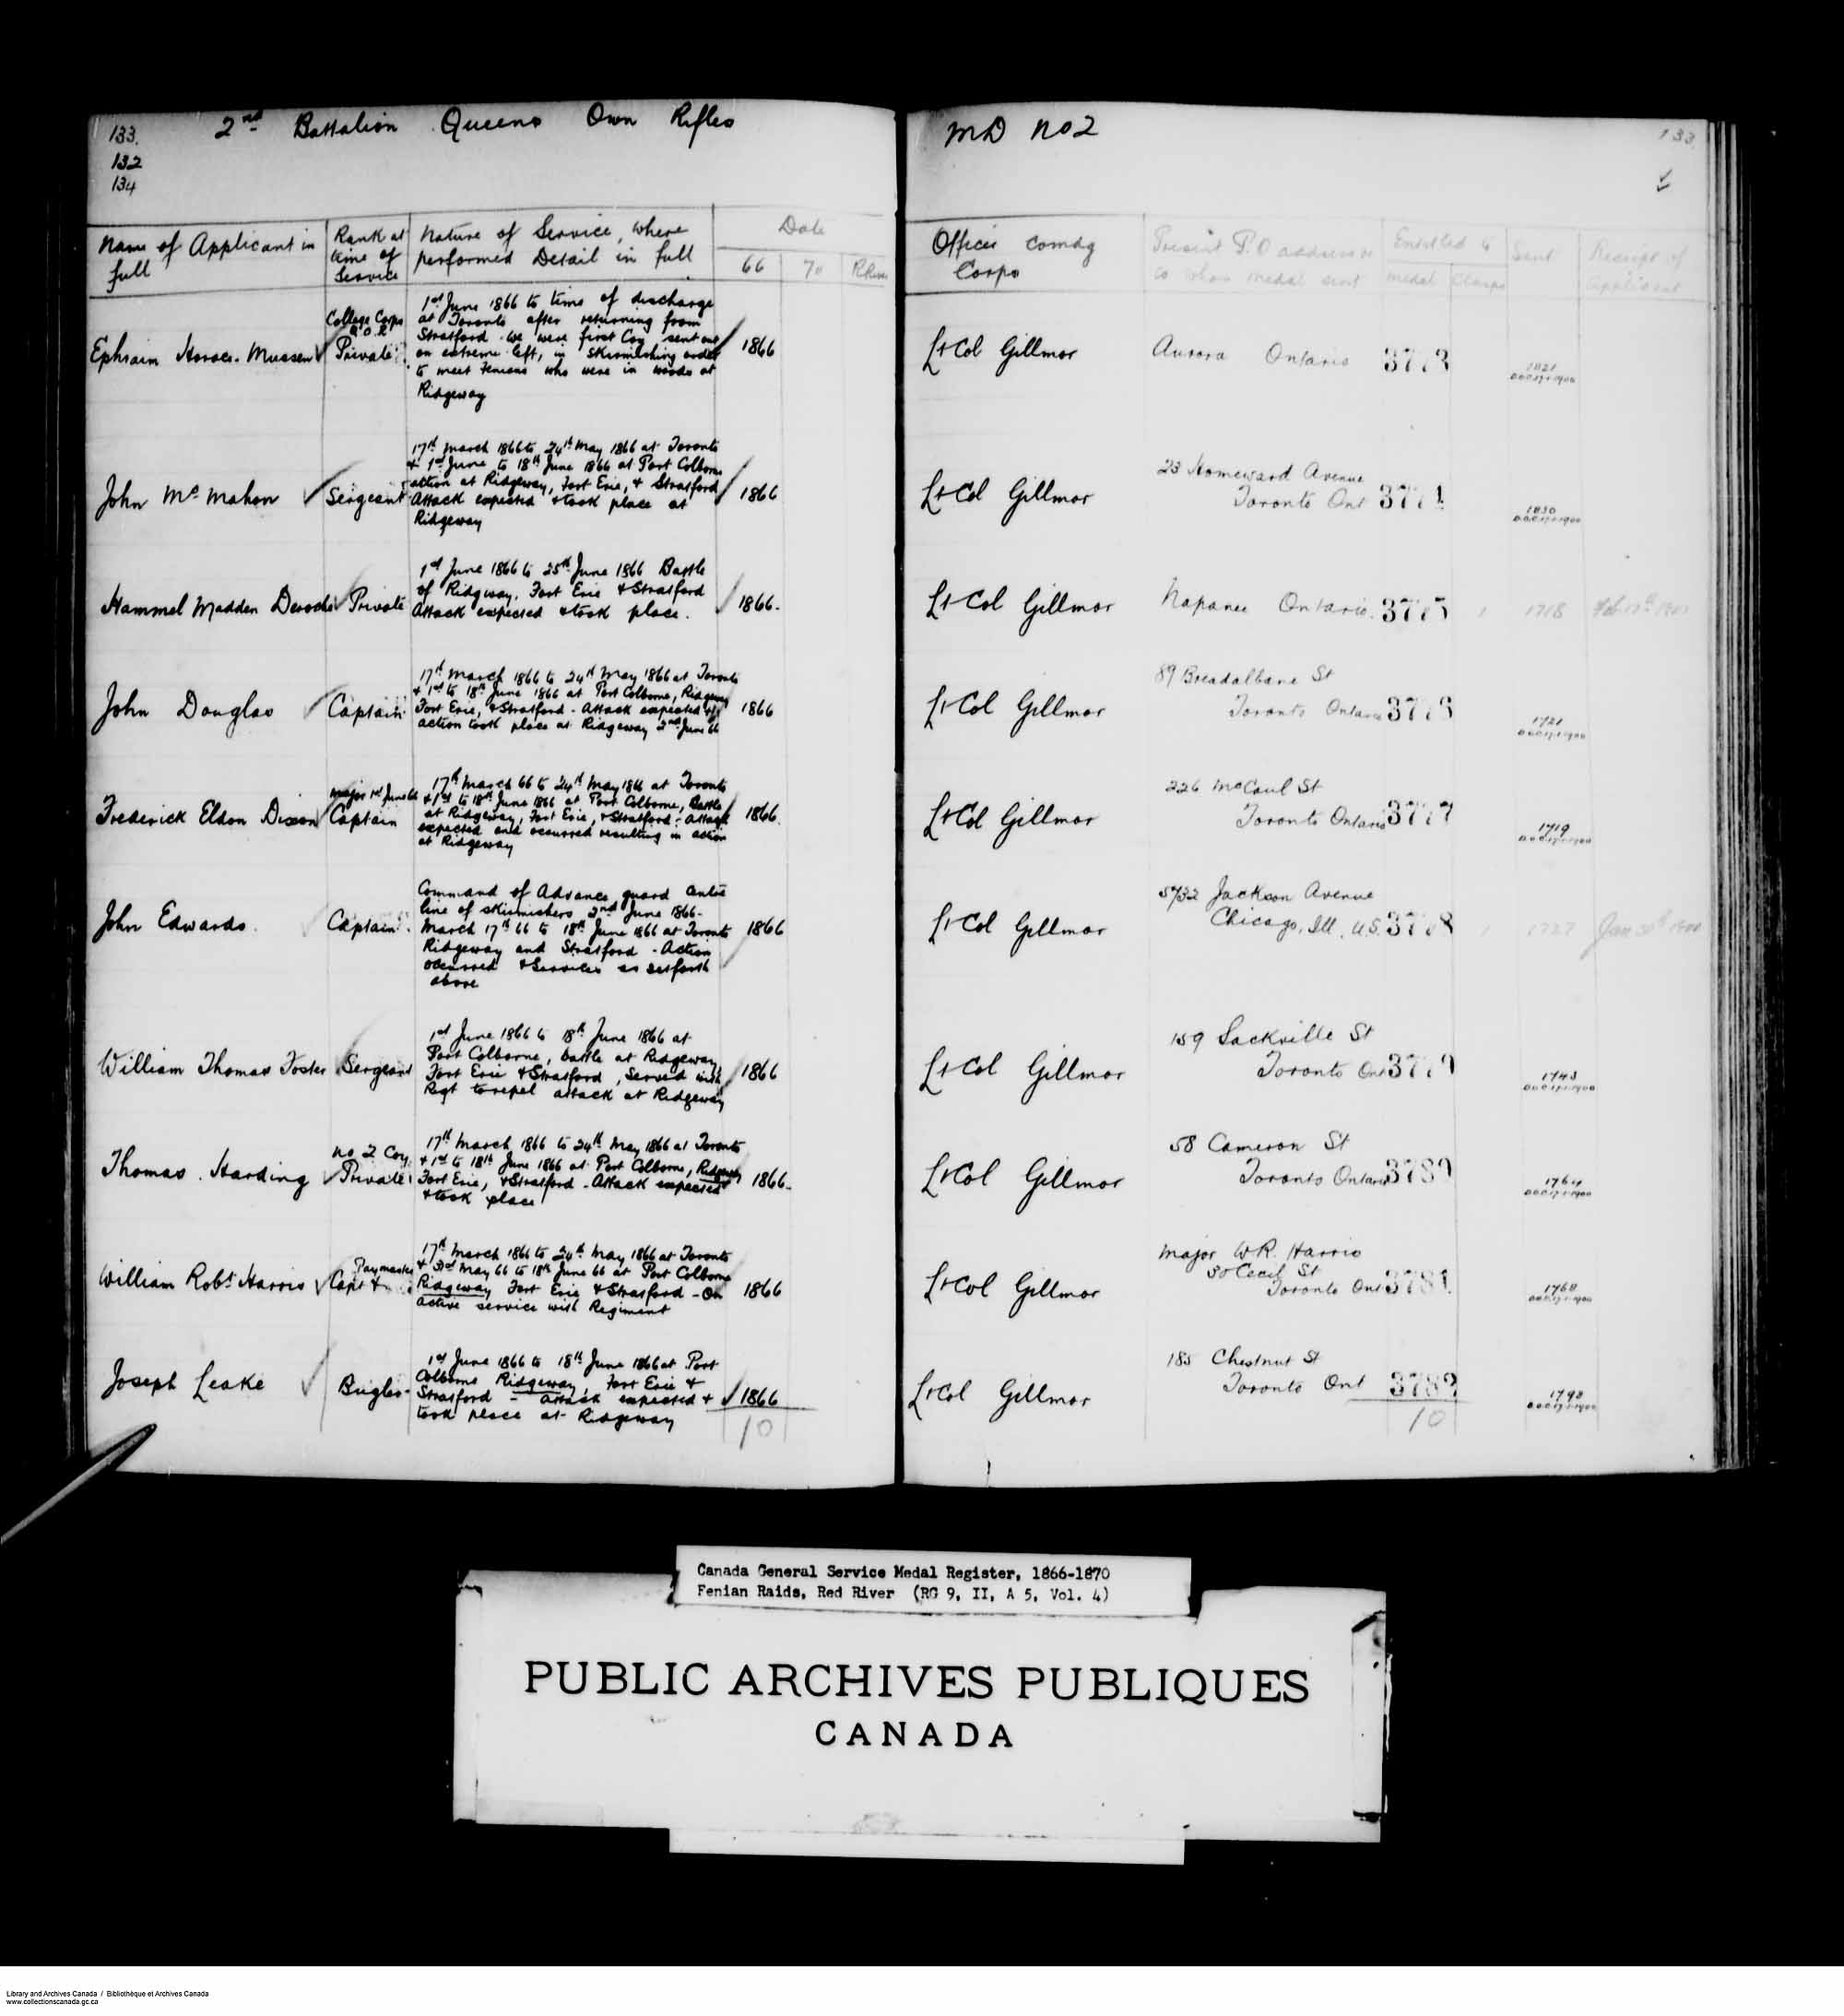 Digitized page of Medals, Honours and Awards for Image No.: e008681820